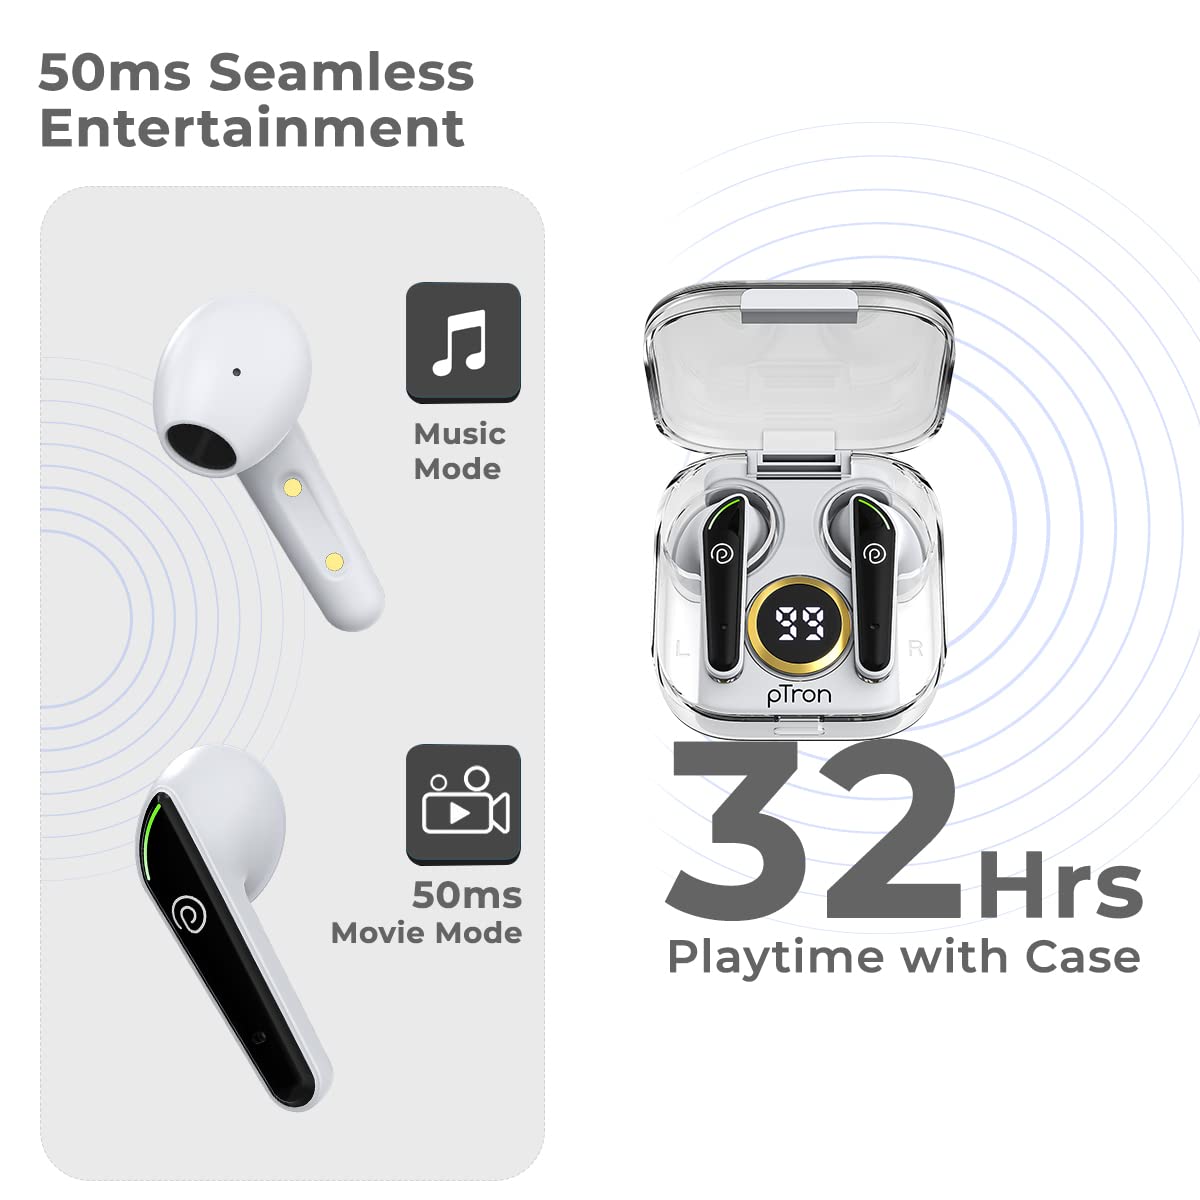 PTron Newly Launched Bassbuds Nyx in-Ear Wireless Headphone, Immersive Audio, BT5.1, Stereo Calls, 50ms Movie Mode, Touch Control TWS Earbuds, Digital Case, Type-C Fast Charging & IPX4 (White/Black)